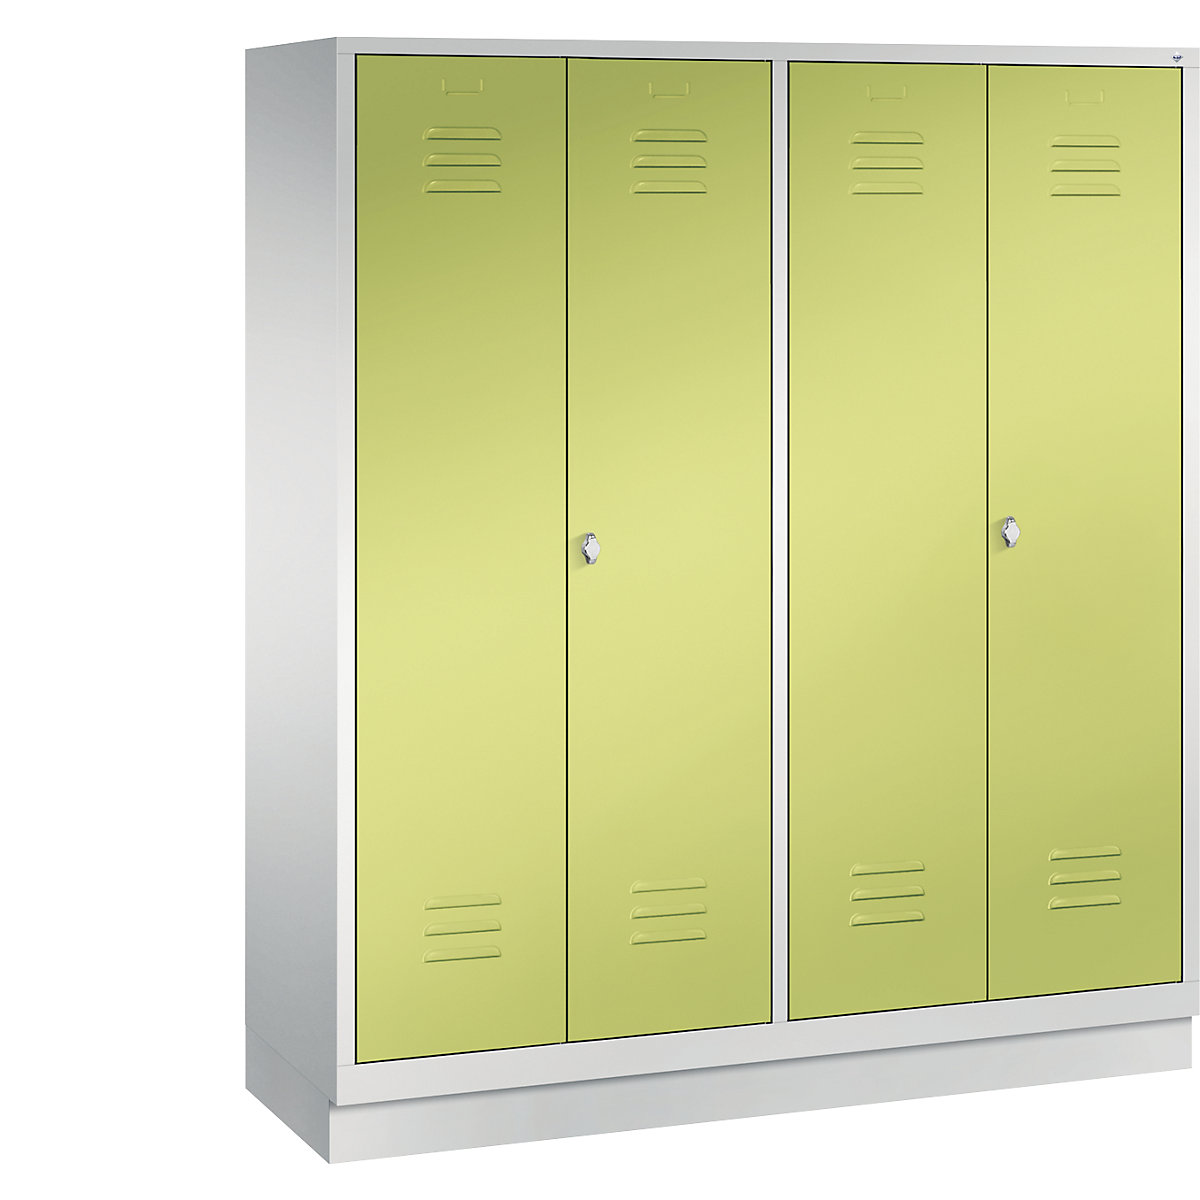 CLASSIC cloakroom locker with plinth, doors close in the middle – C+P, 4 compartments, compartment width 400 mm, light grey / viridian green-10